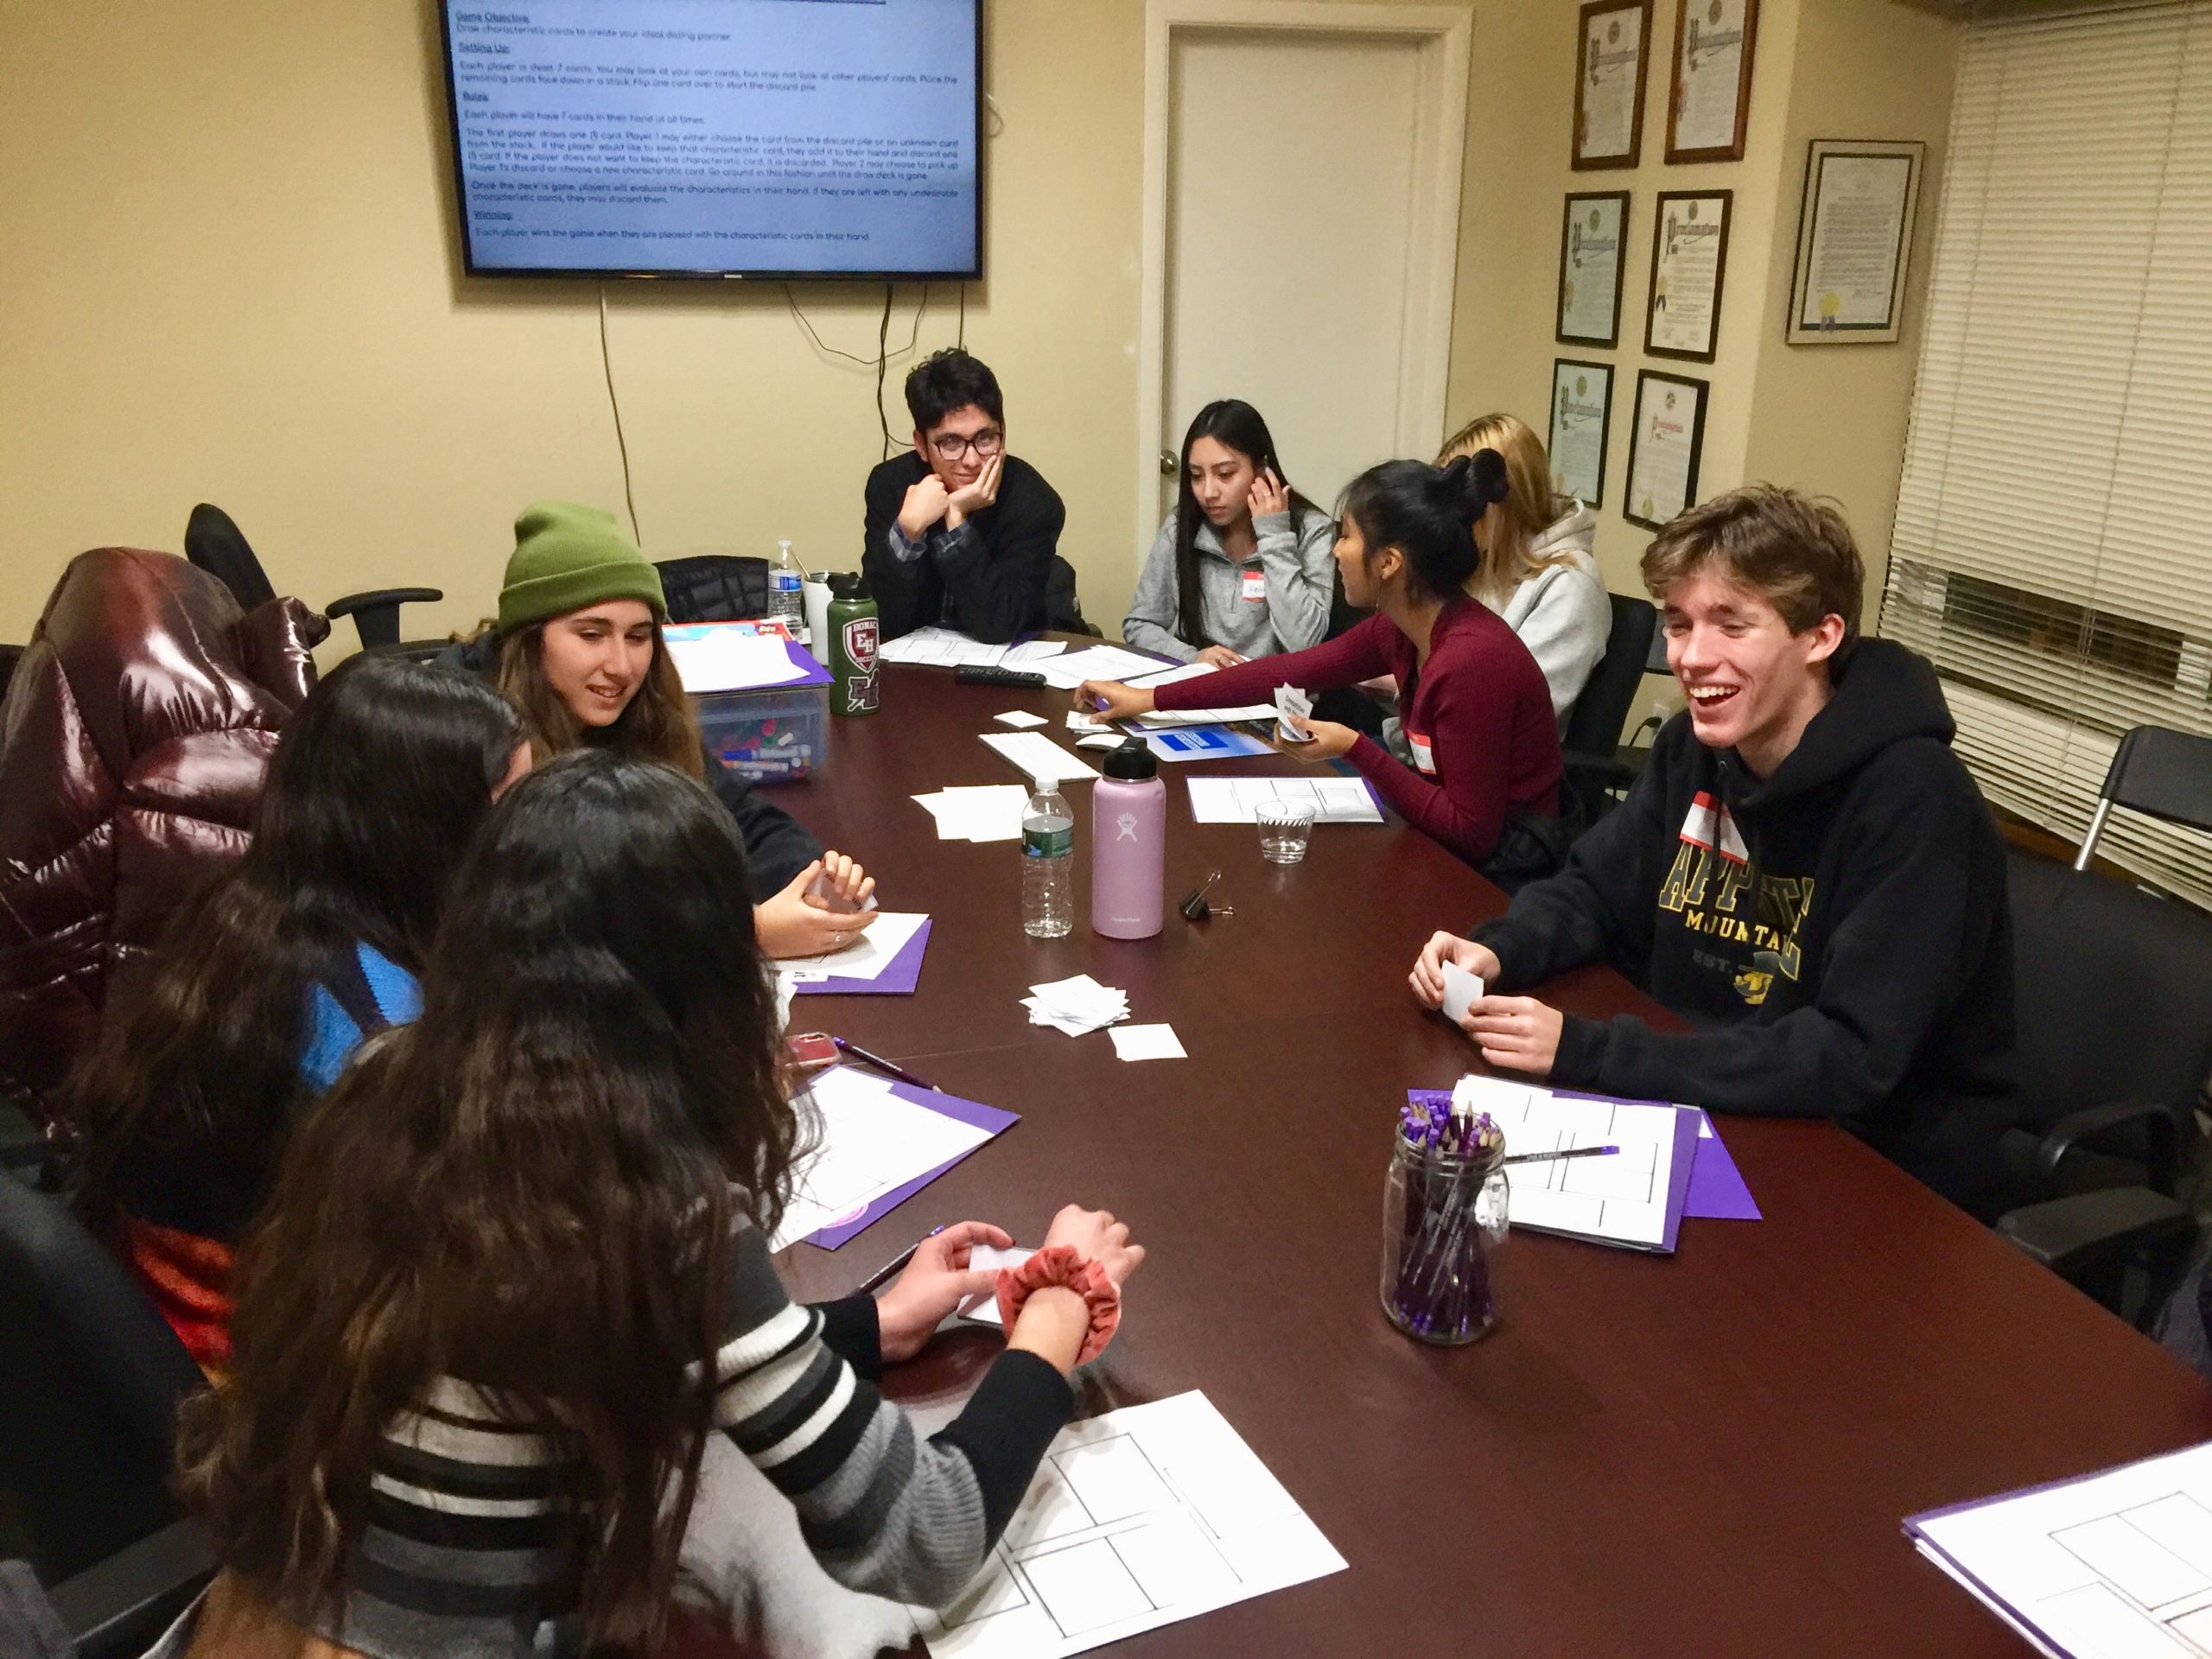 The East Hampton teen leadership team working with The Retreat prior to the Covid-19 virus outbreak.